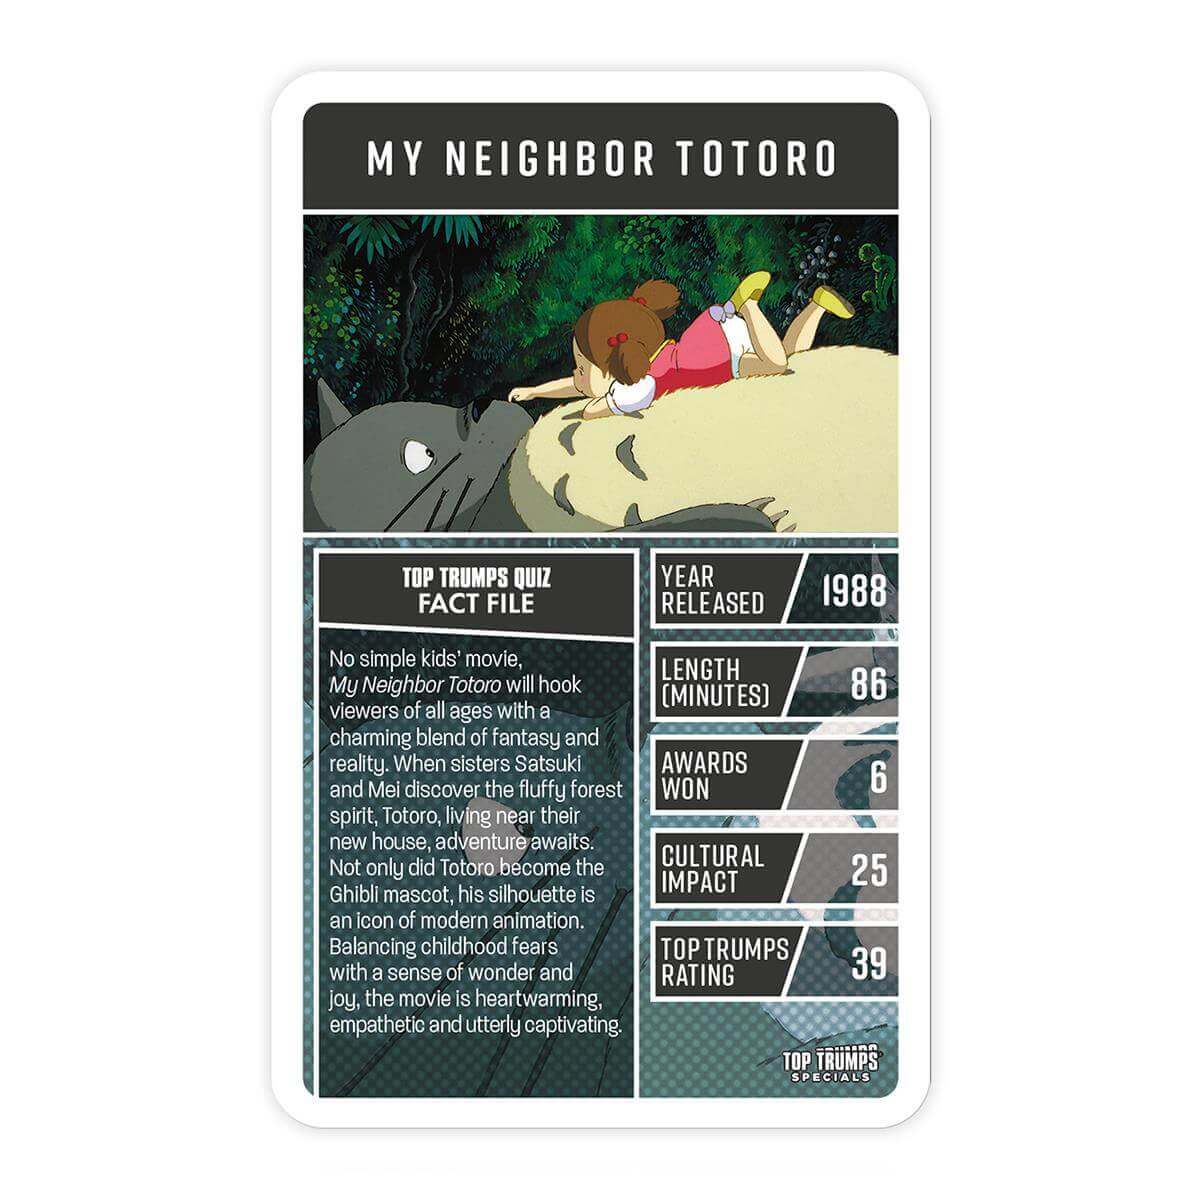 Top Trumps - Guide to Anime